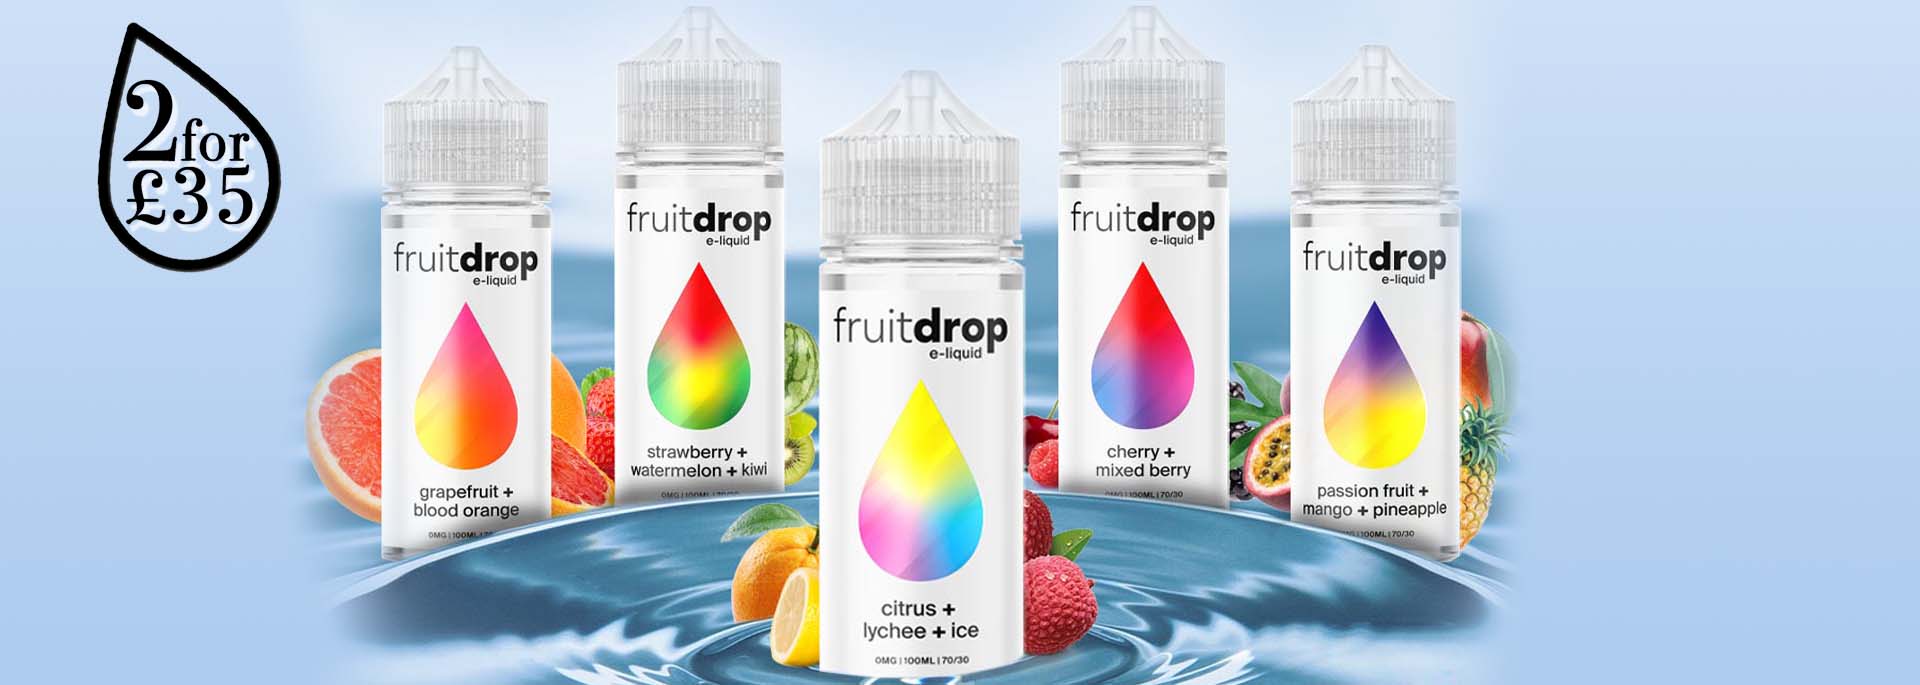 Fruit Drop Vape E-Liquid Banner, Fruit Drop is a Vape Brand made in the UK and stocked at London Vape House which is a Vape Shop in London, Holborn and Richmond, with products available to Buy Onlin 